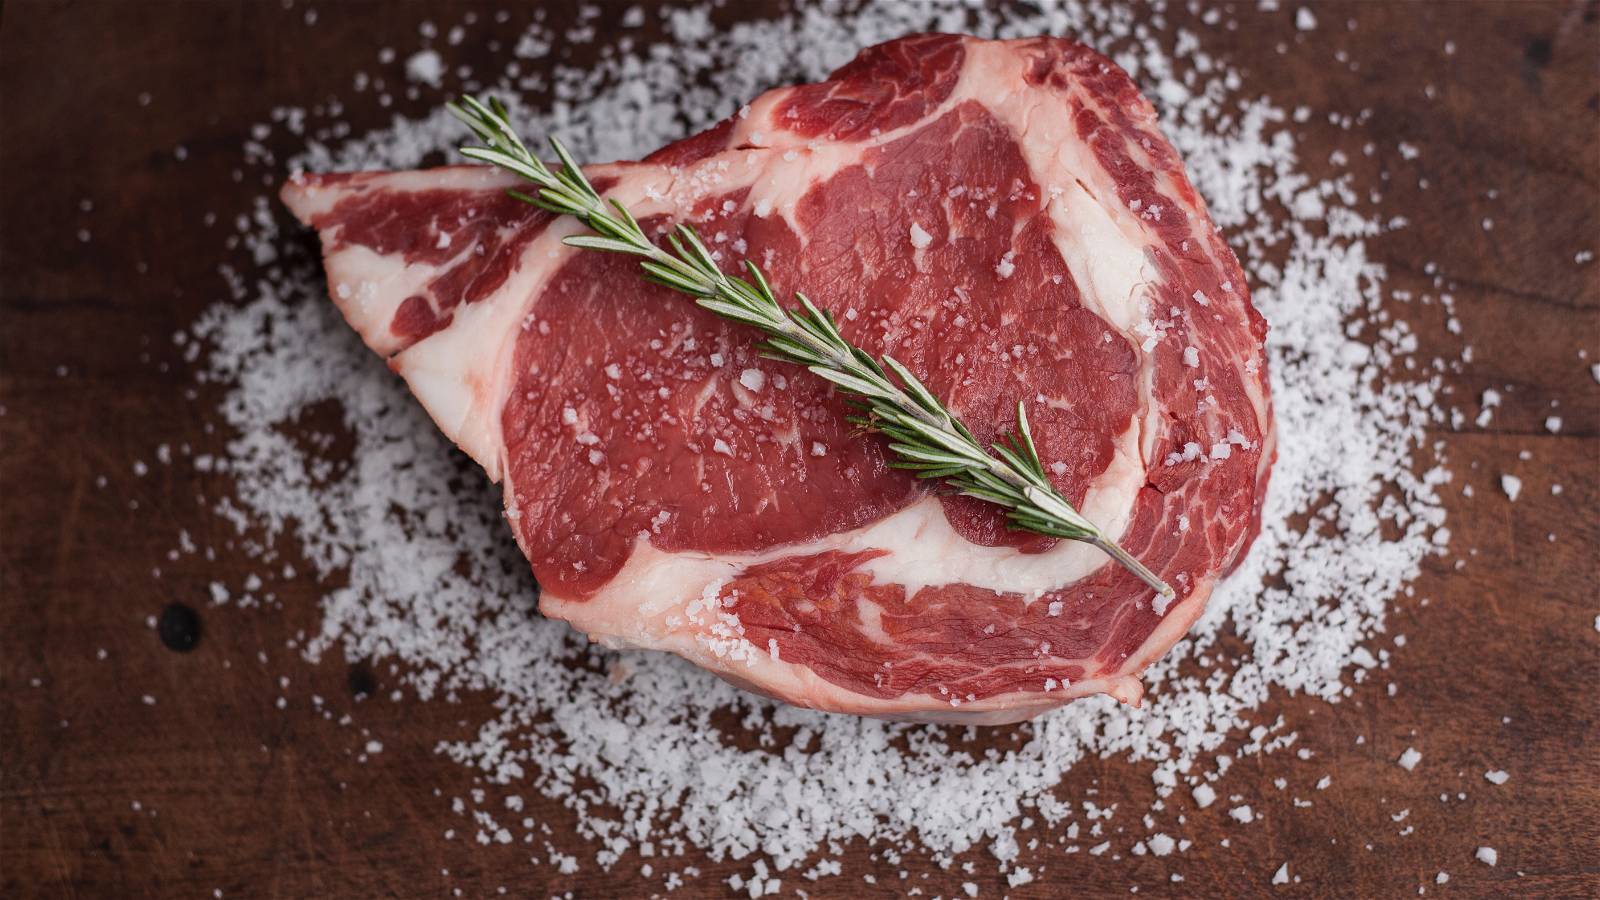 Are Americans really eating more meat?